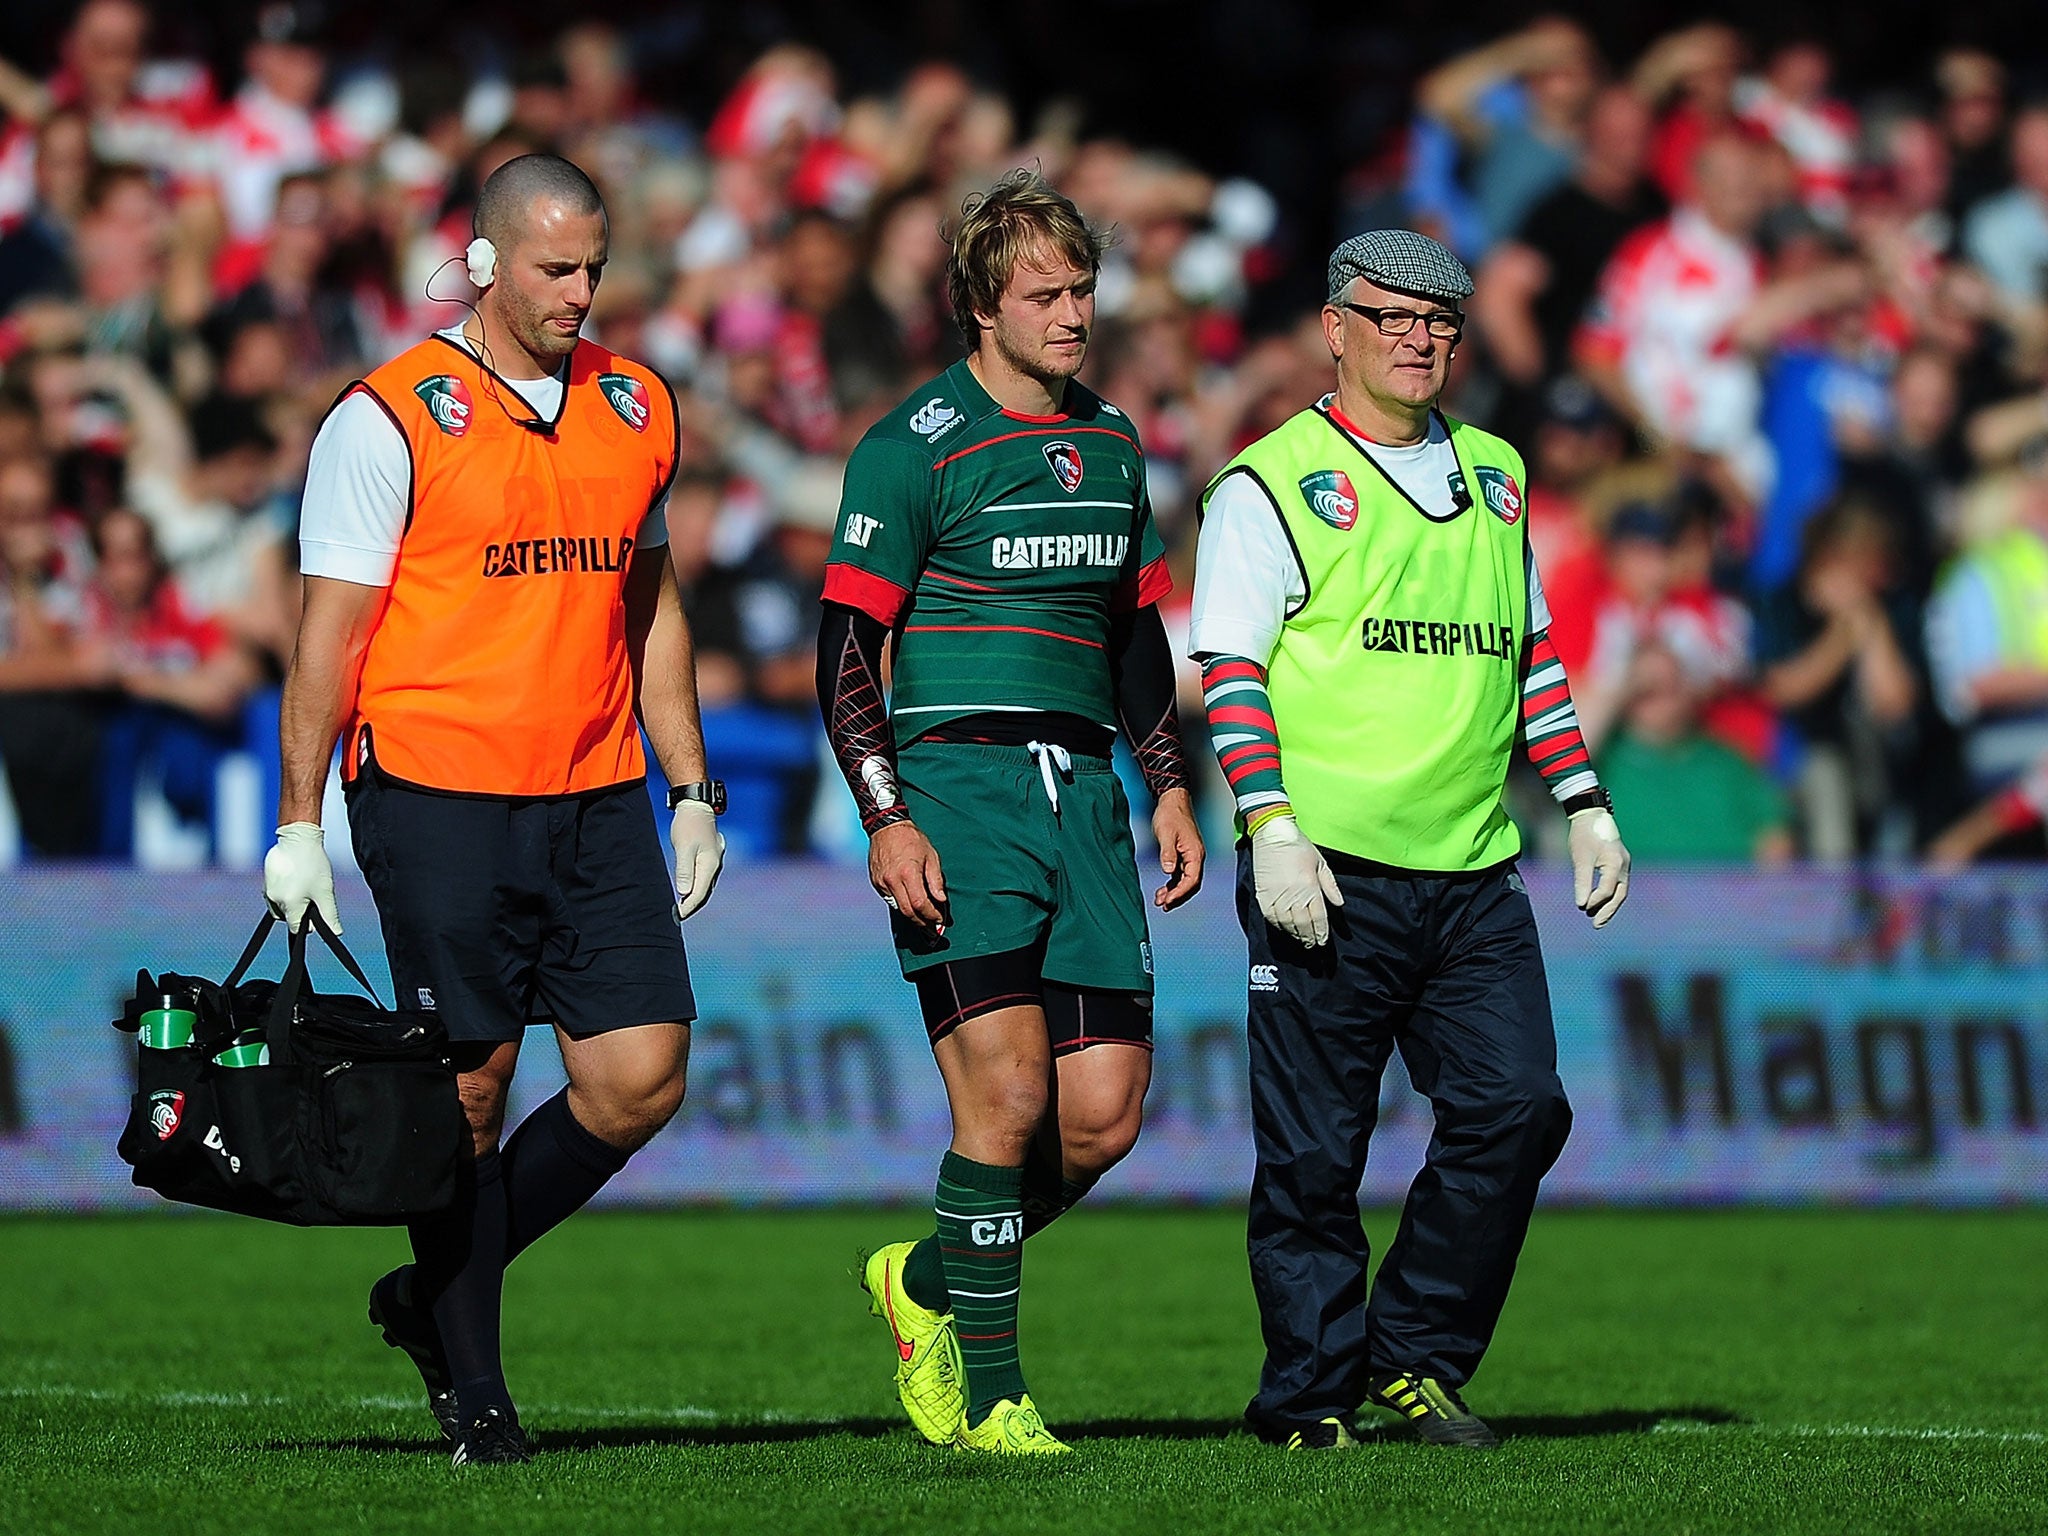 Mathew Tait is led from the field after picking up an injury in the defeat to Gloucester